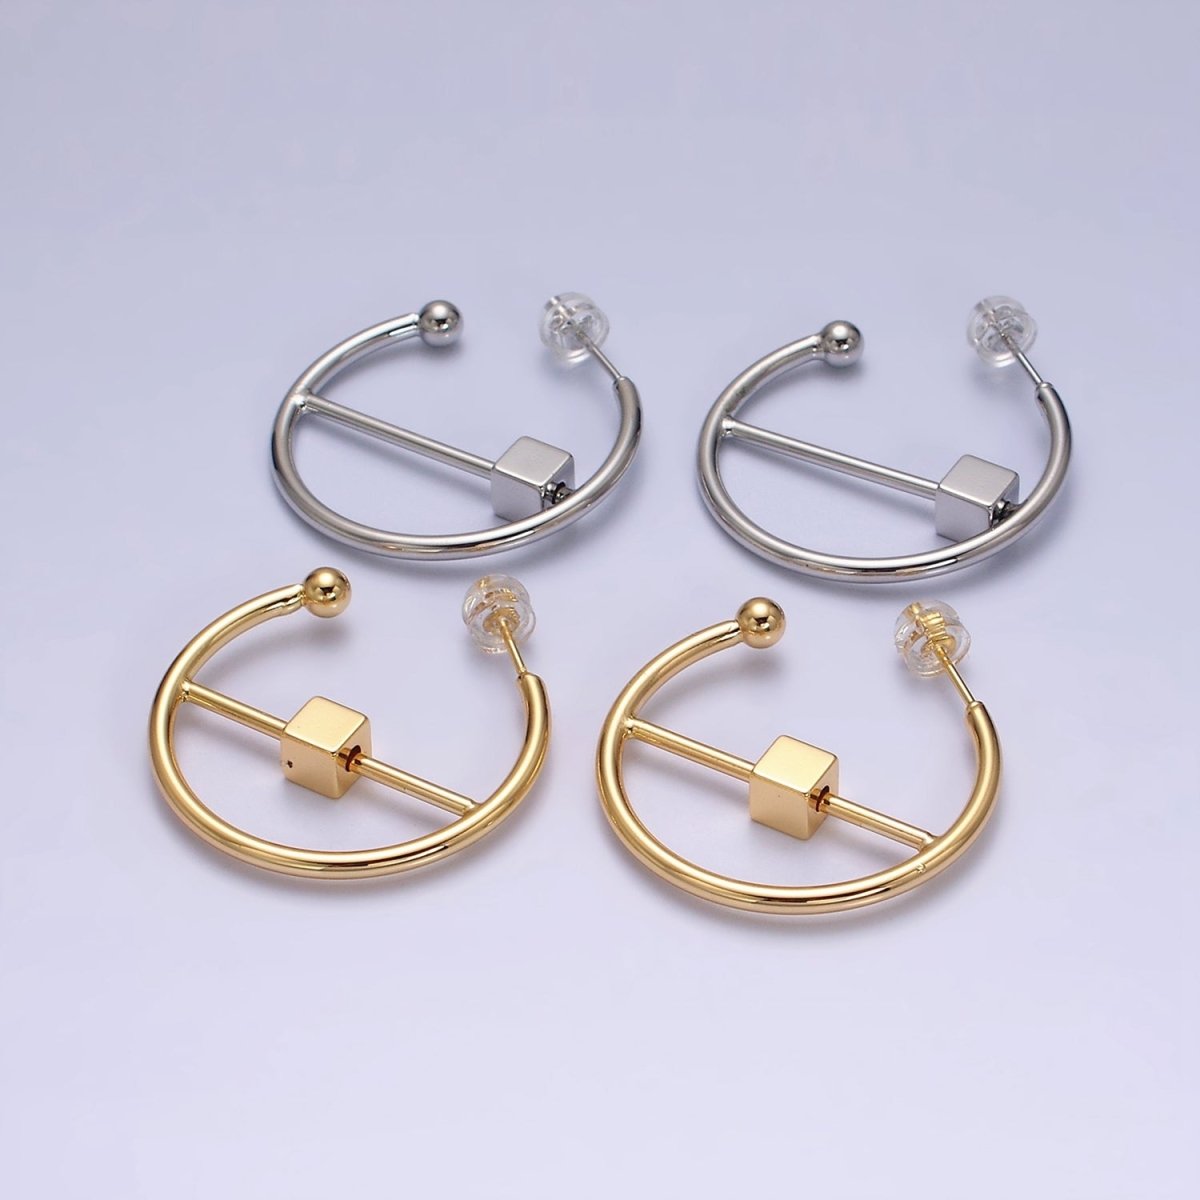 16K Gold Filled 30mm Block Bar Geometric C-Shaped Hoop Earrings in Gold & Silver | AD1345 AD1346 - DLUXCA